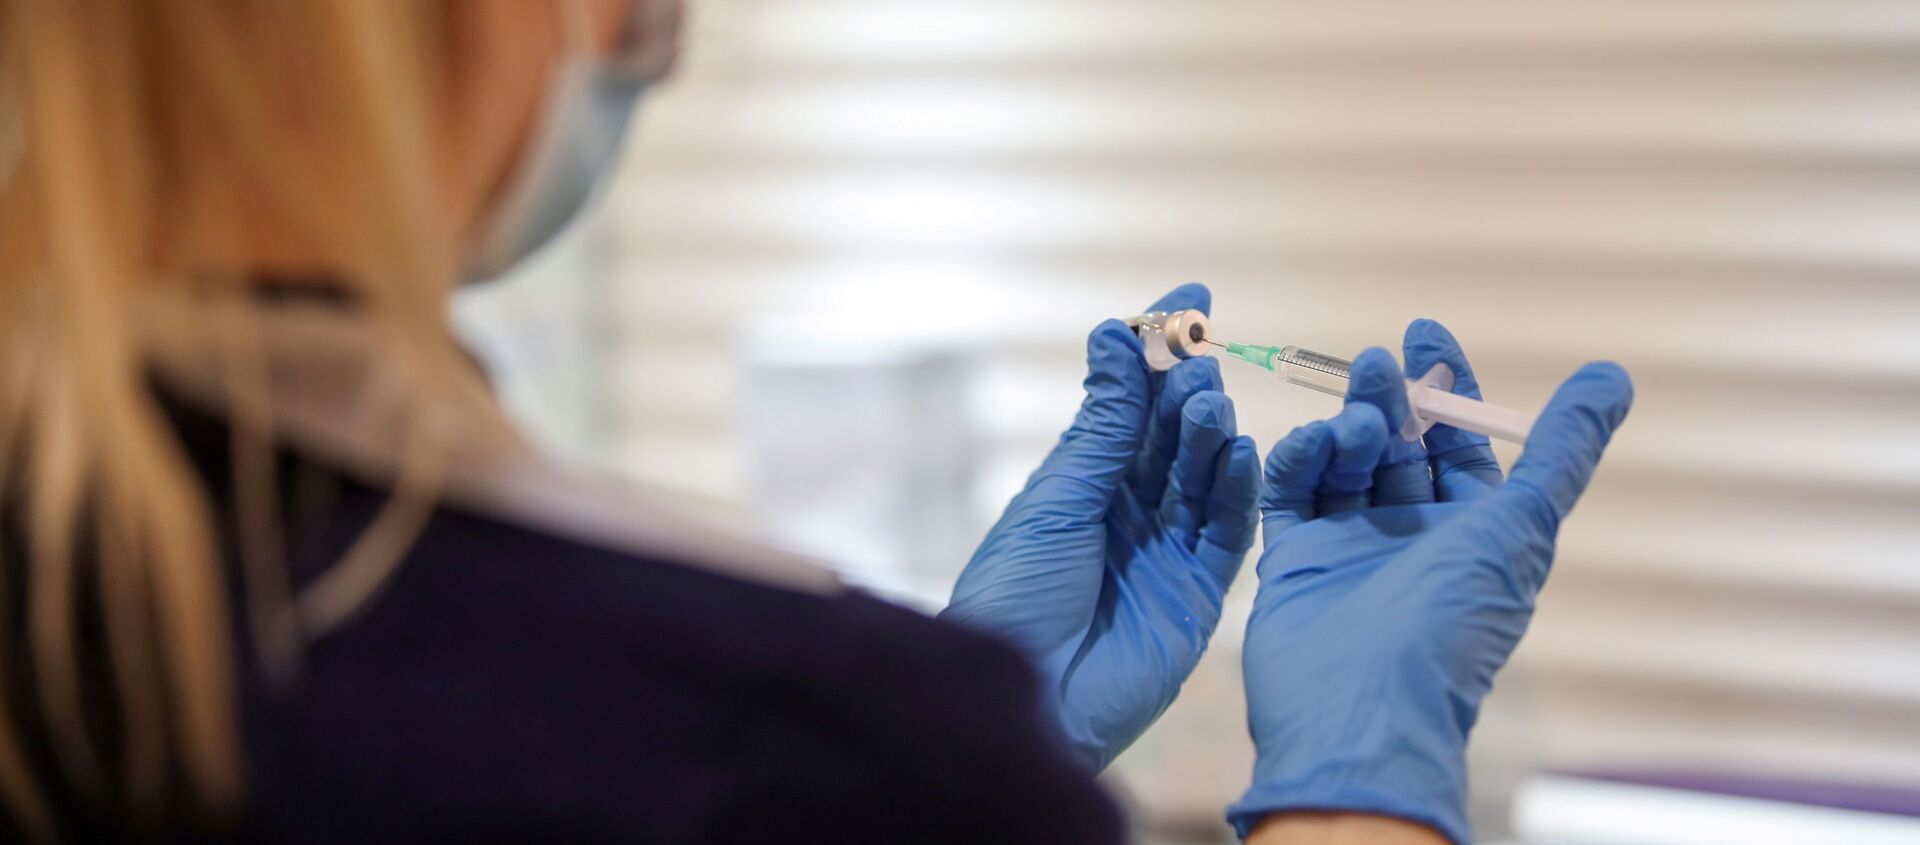 A healthcare worker fills a syringe with the Pfizer-BioNTech coronavirus disease (COVID-19) vaccine at Thornton Little Theatre managed by Wyre Council in Lancashire, Britain January 29, 2021 - Sputnik International, 1920, 05.02.2021